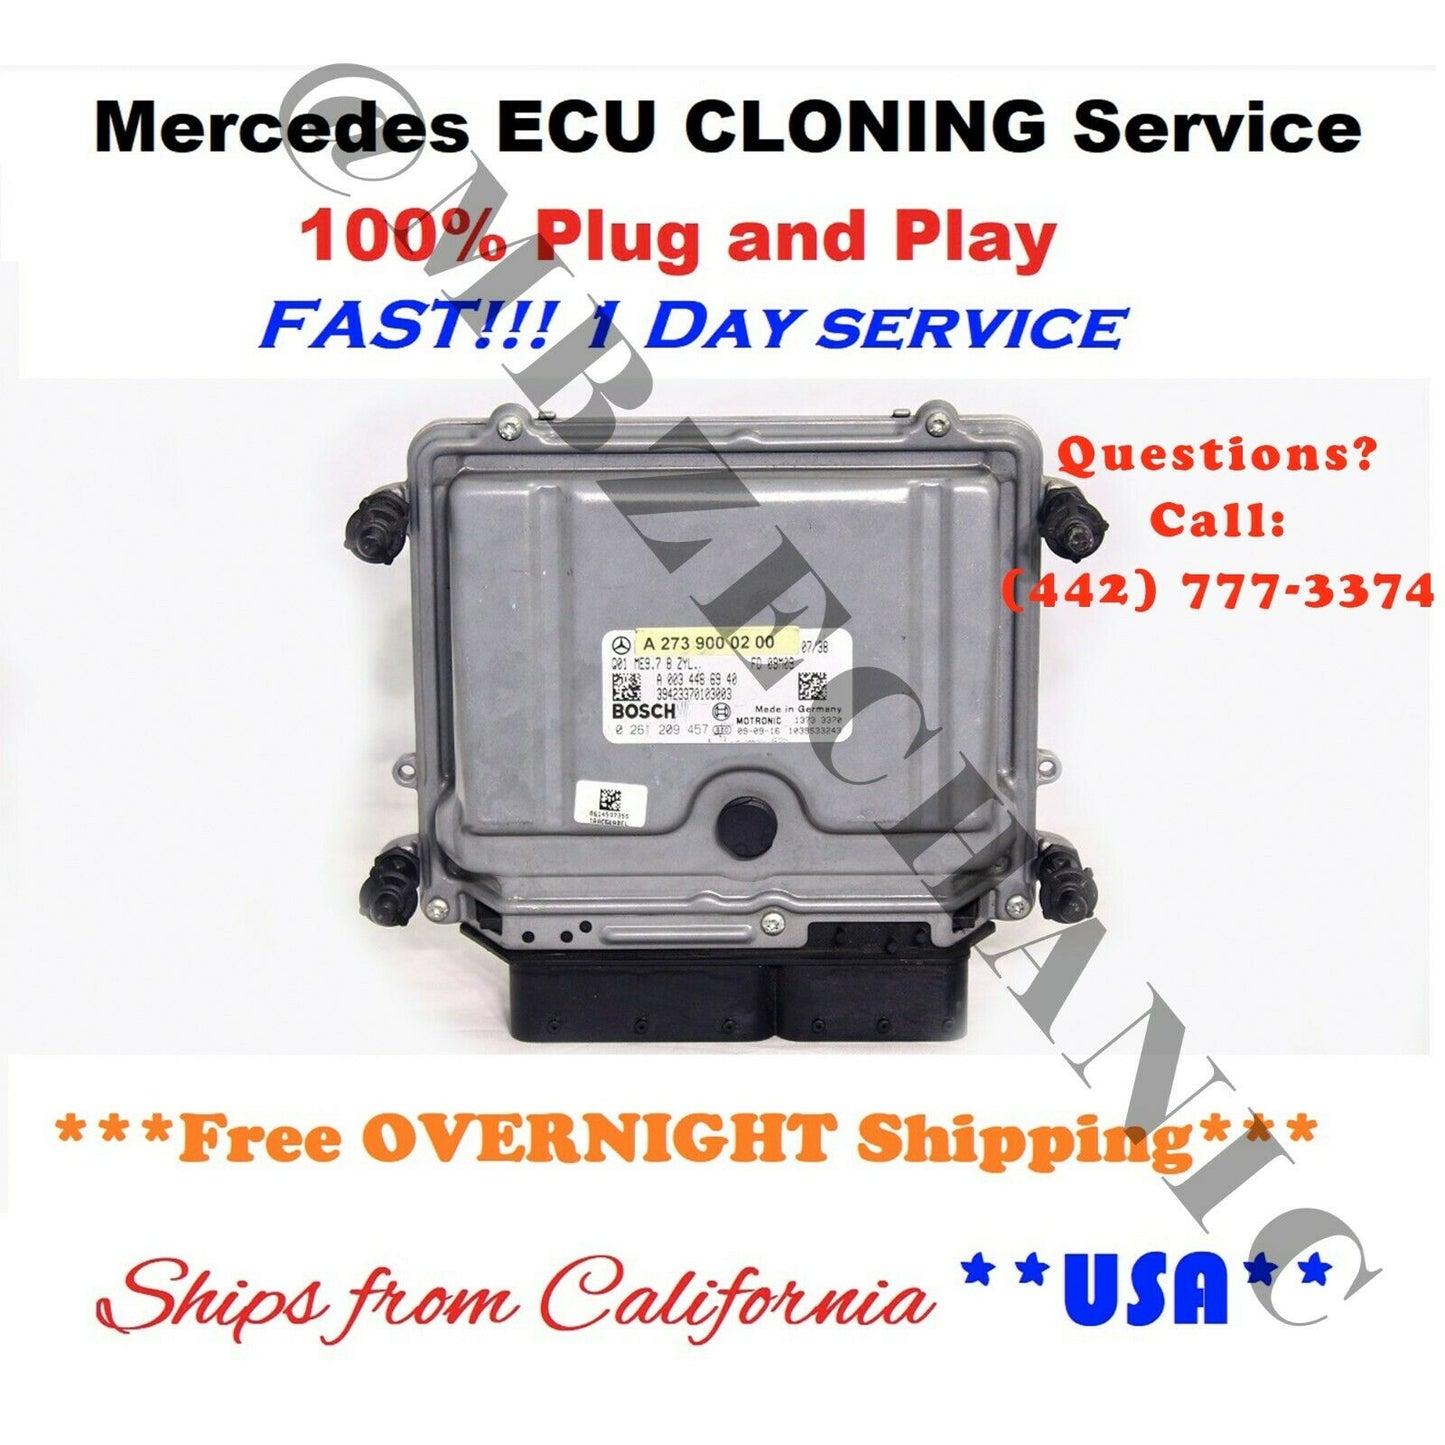 Mercedes CL 215 ECU Engine Computer CLONING SERVICE Plug and Play